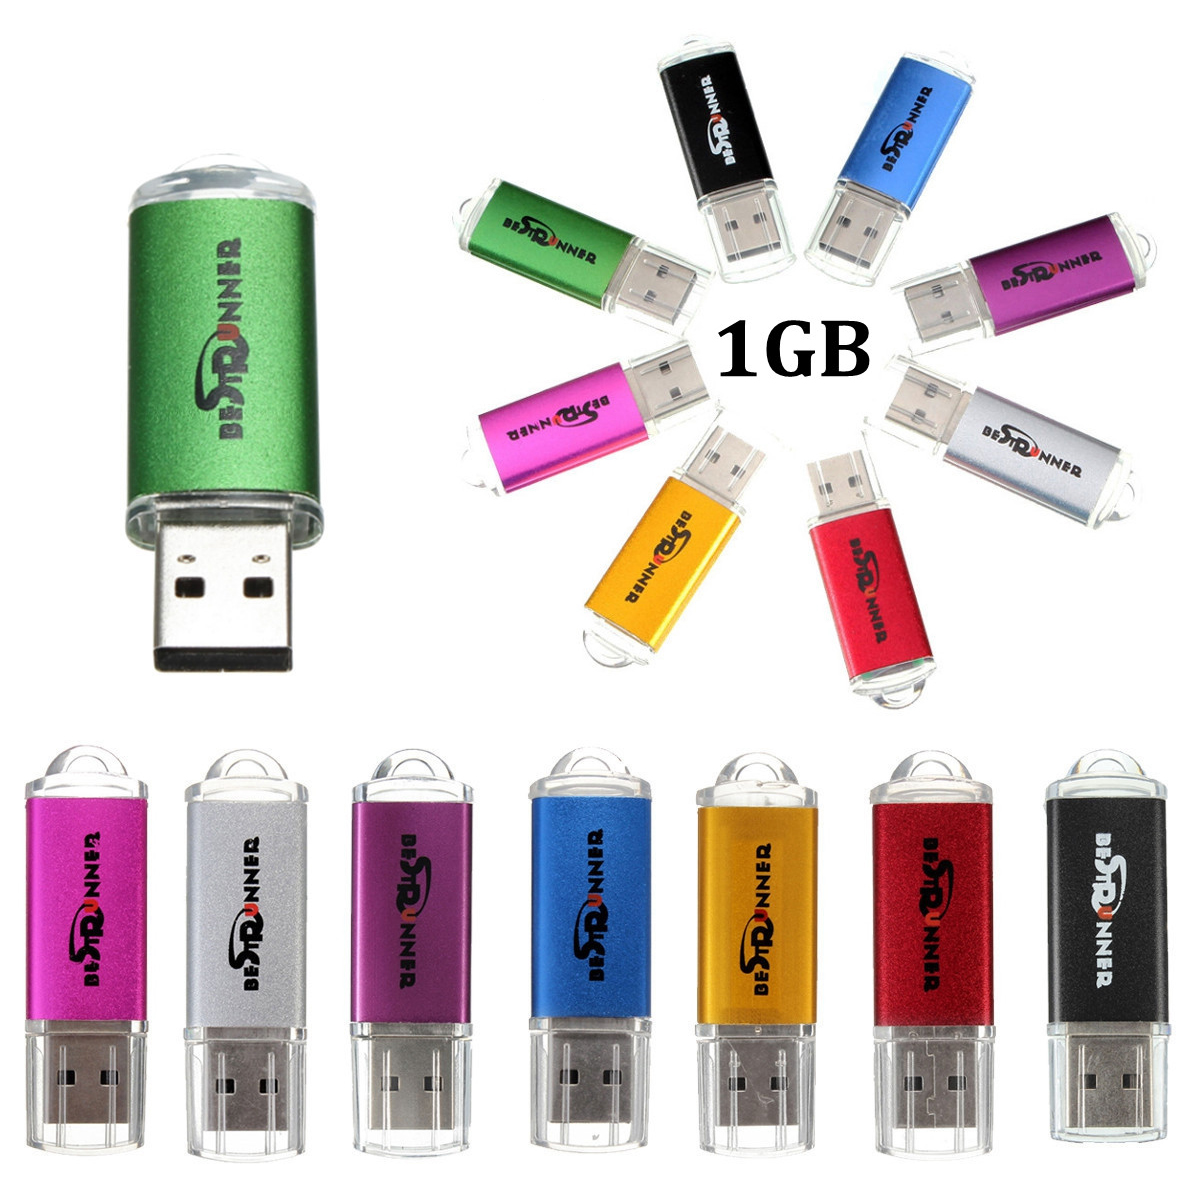 Find Bestrunner Multi Color Portable USB 2 0 1GB/960M Pendrive USB Disk for Macbook Laptop PC for Sale on Gipsybee.com with cryptocurrencies